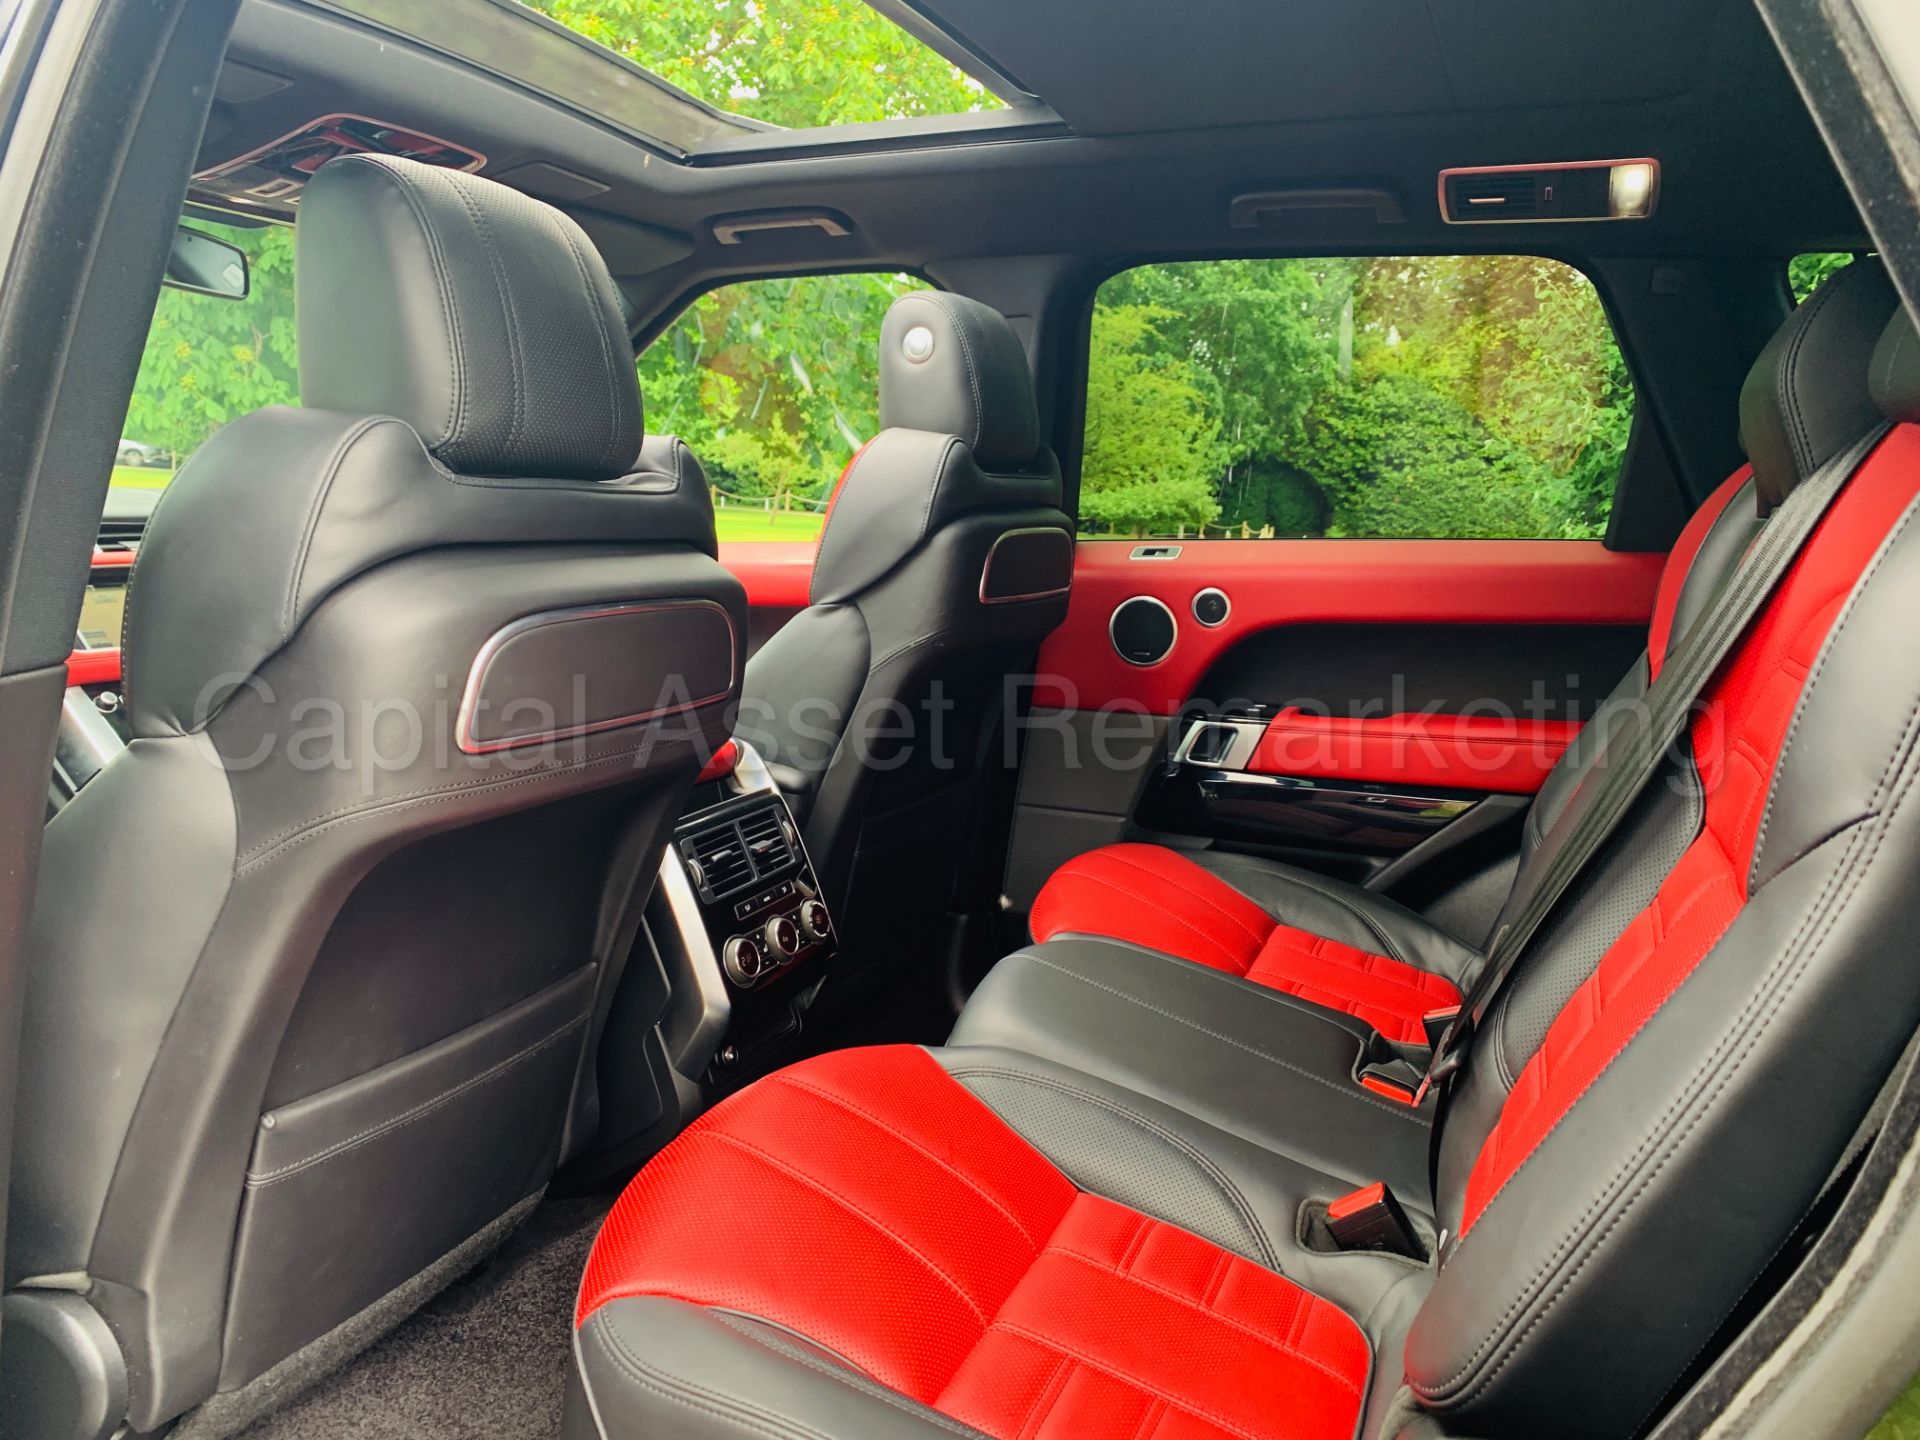 (On Sale) RANGE ROVER SPORT *AUTOBIOGRAPHY DYNAMIC* (2015) '4.4 SDV8 8 SPEED AUTO' **ULTIMATE SPEC** - Image 35 of 83